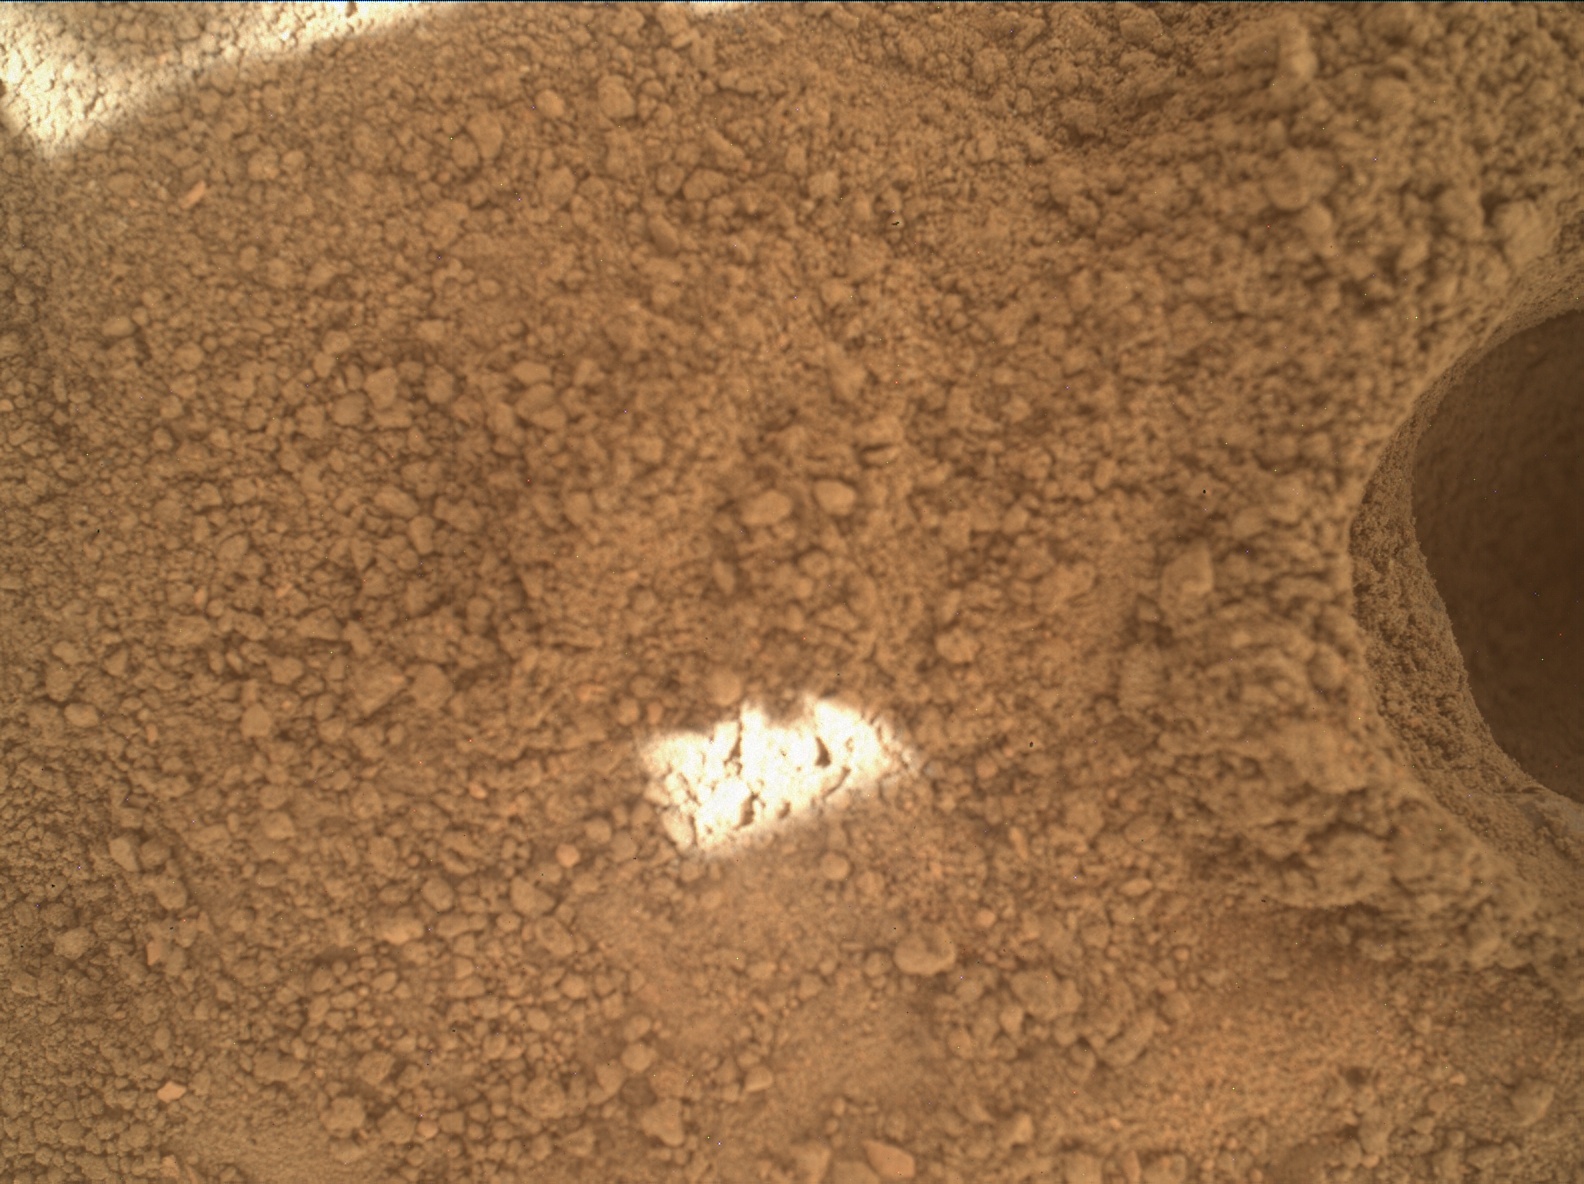 Nasa's Mars rover Curiosity acquired this image using its Mars Hand Lens Imager (MAHLI) on Sol 3682